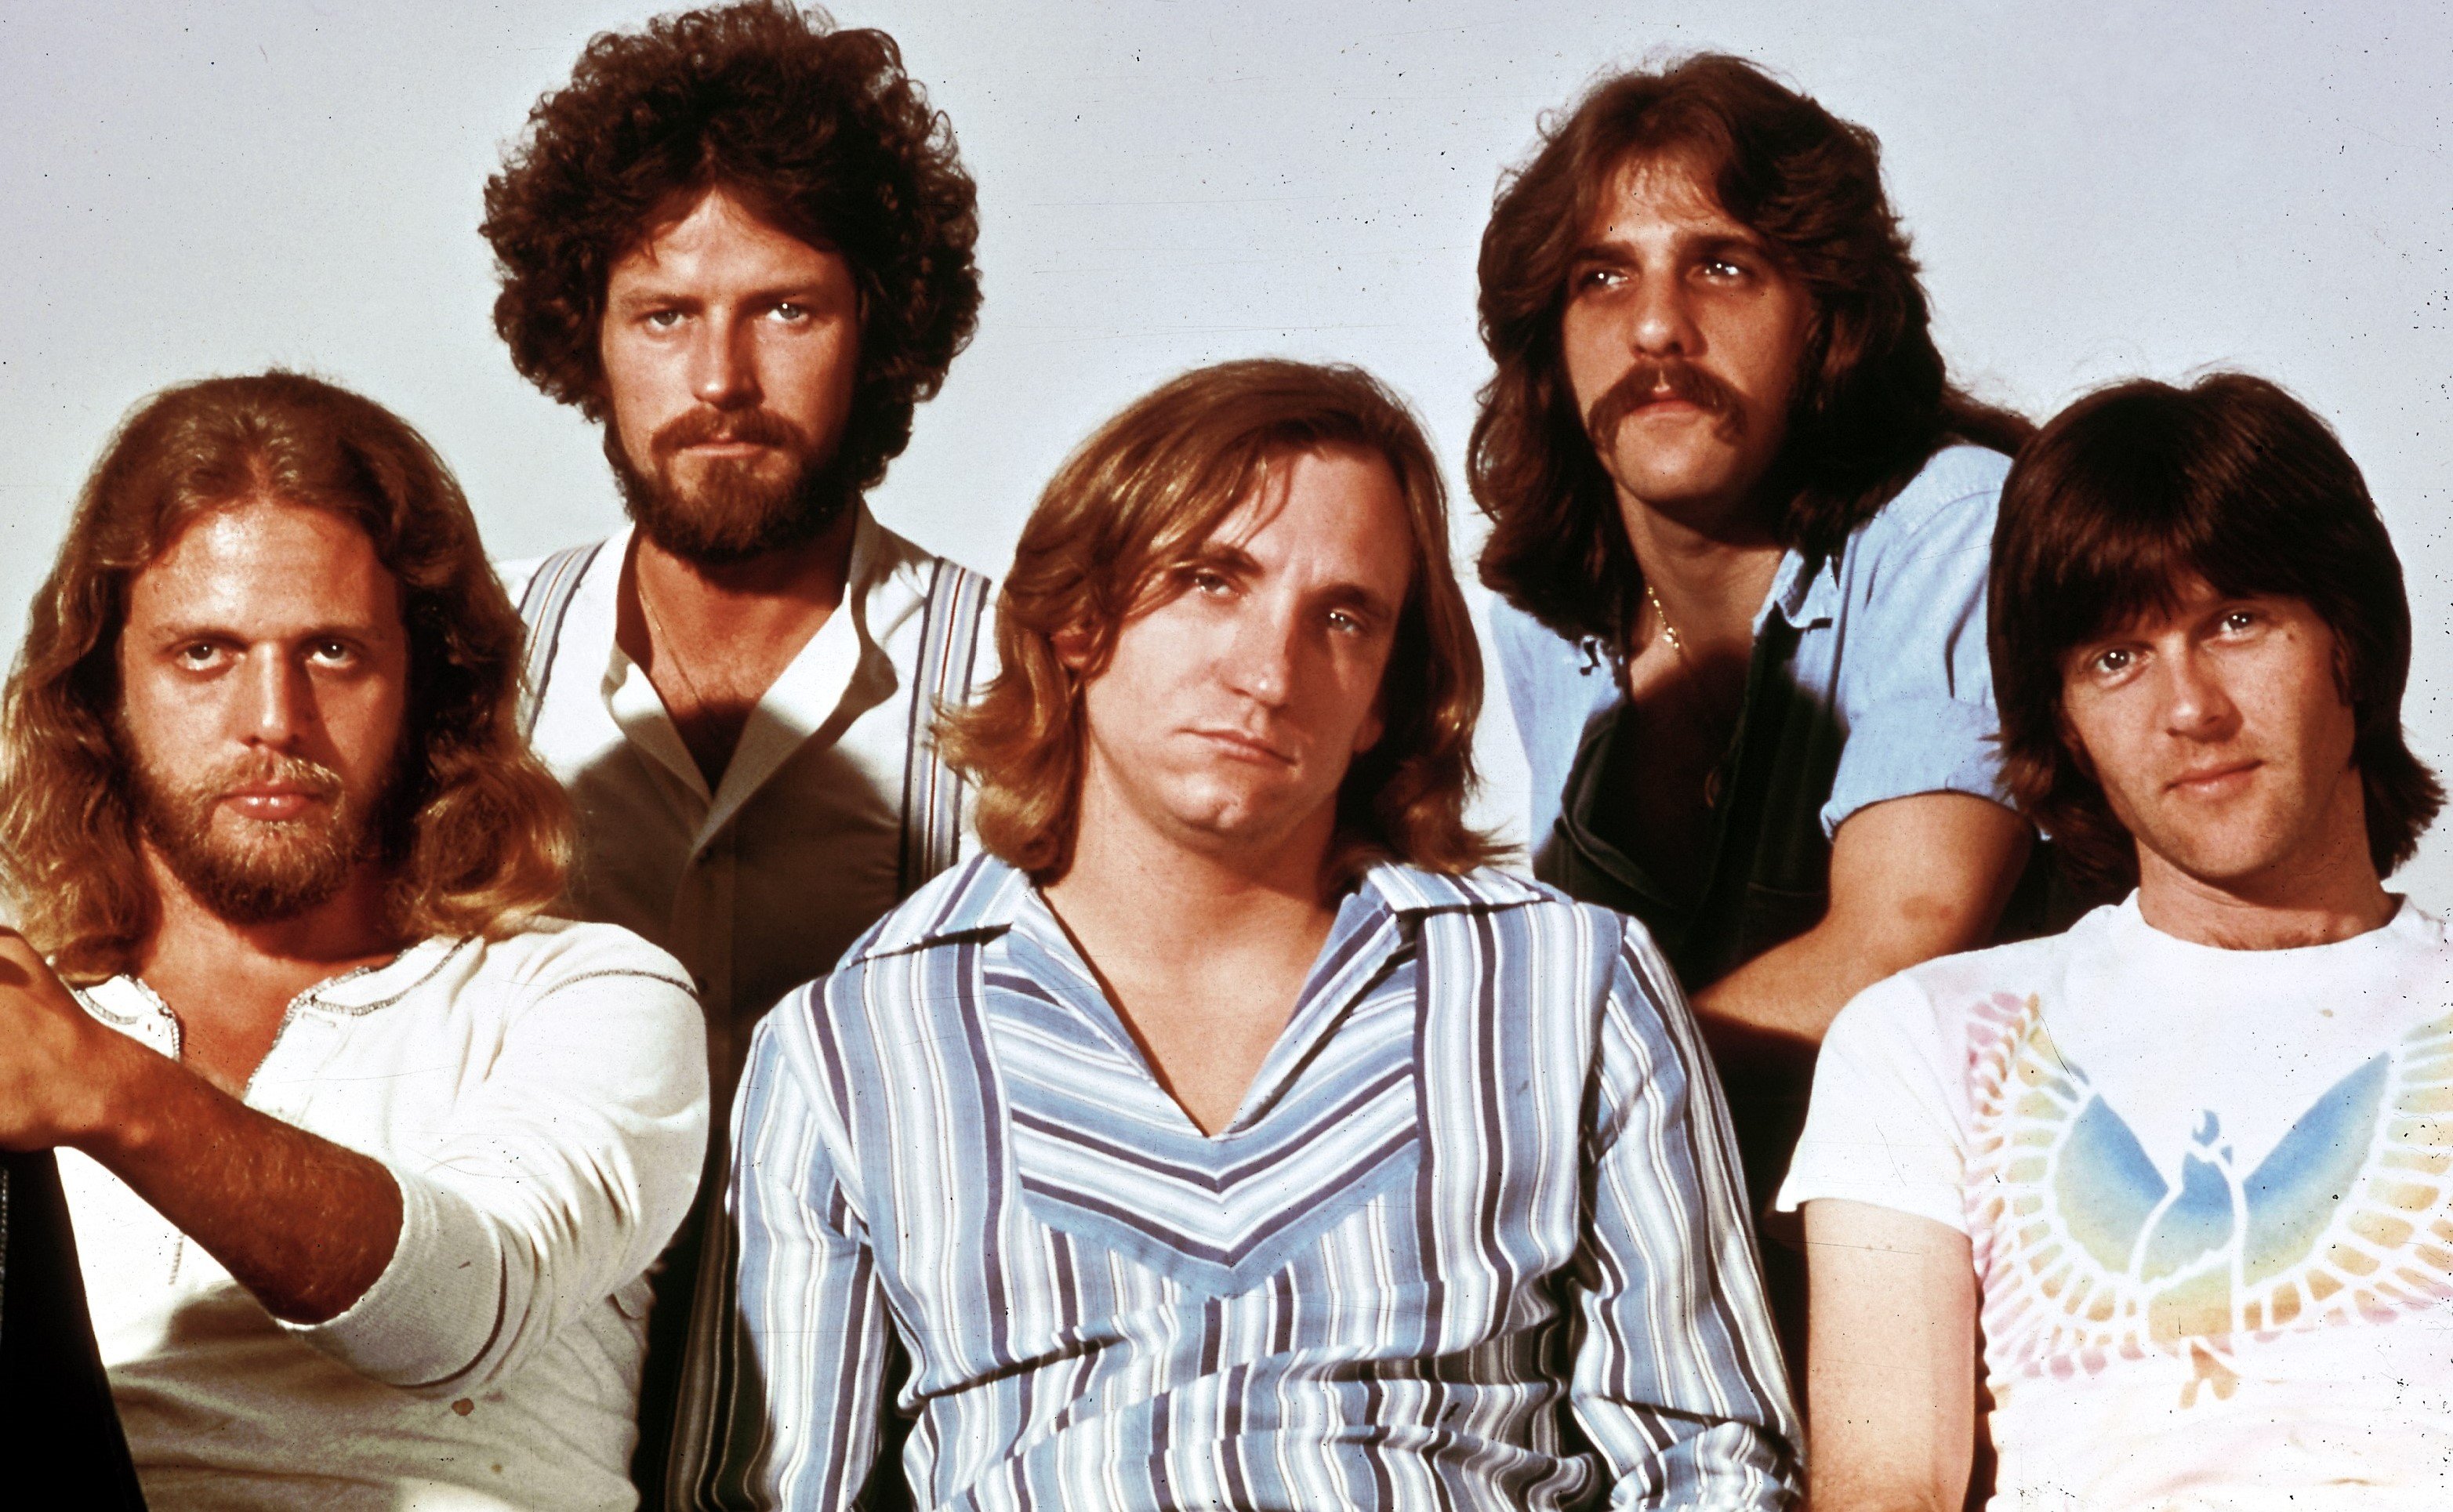 The Eagles with long hair during the "Witchy Woman" era